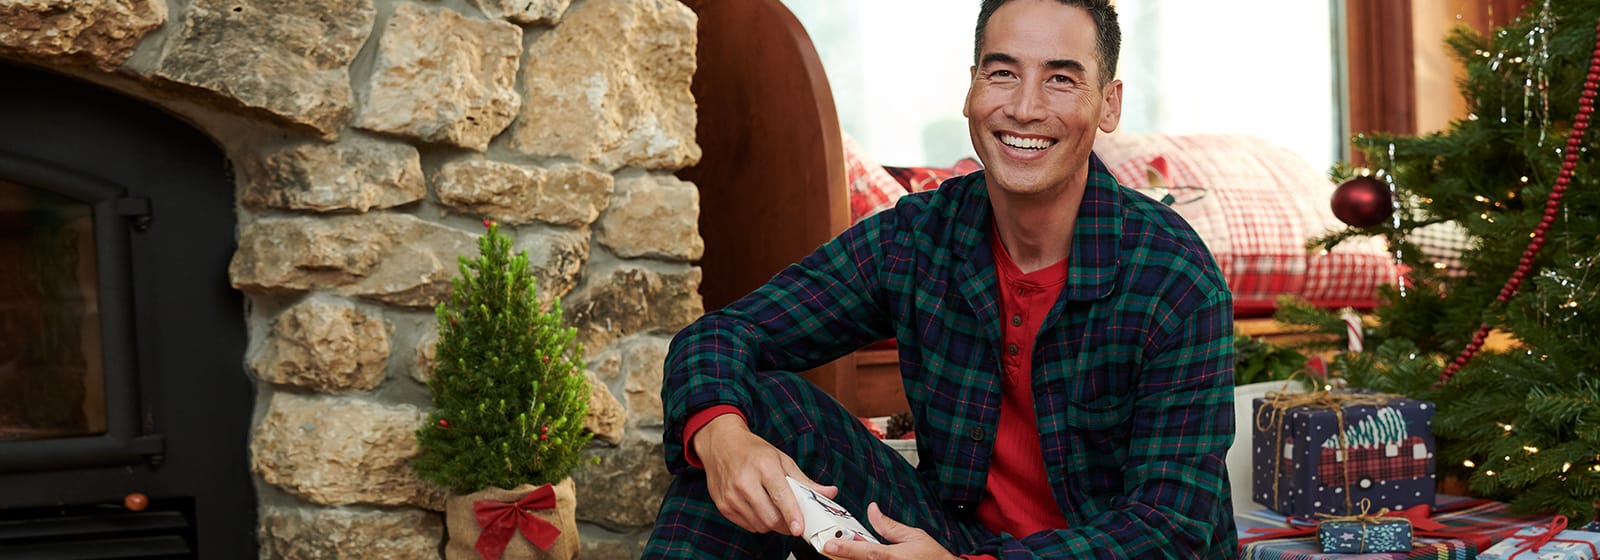 Get a Good Night's Sleep with the Best Men's Pajamas